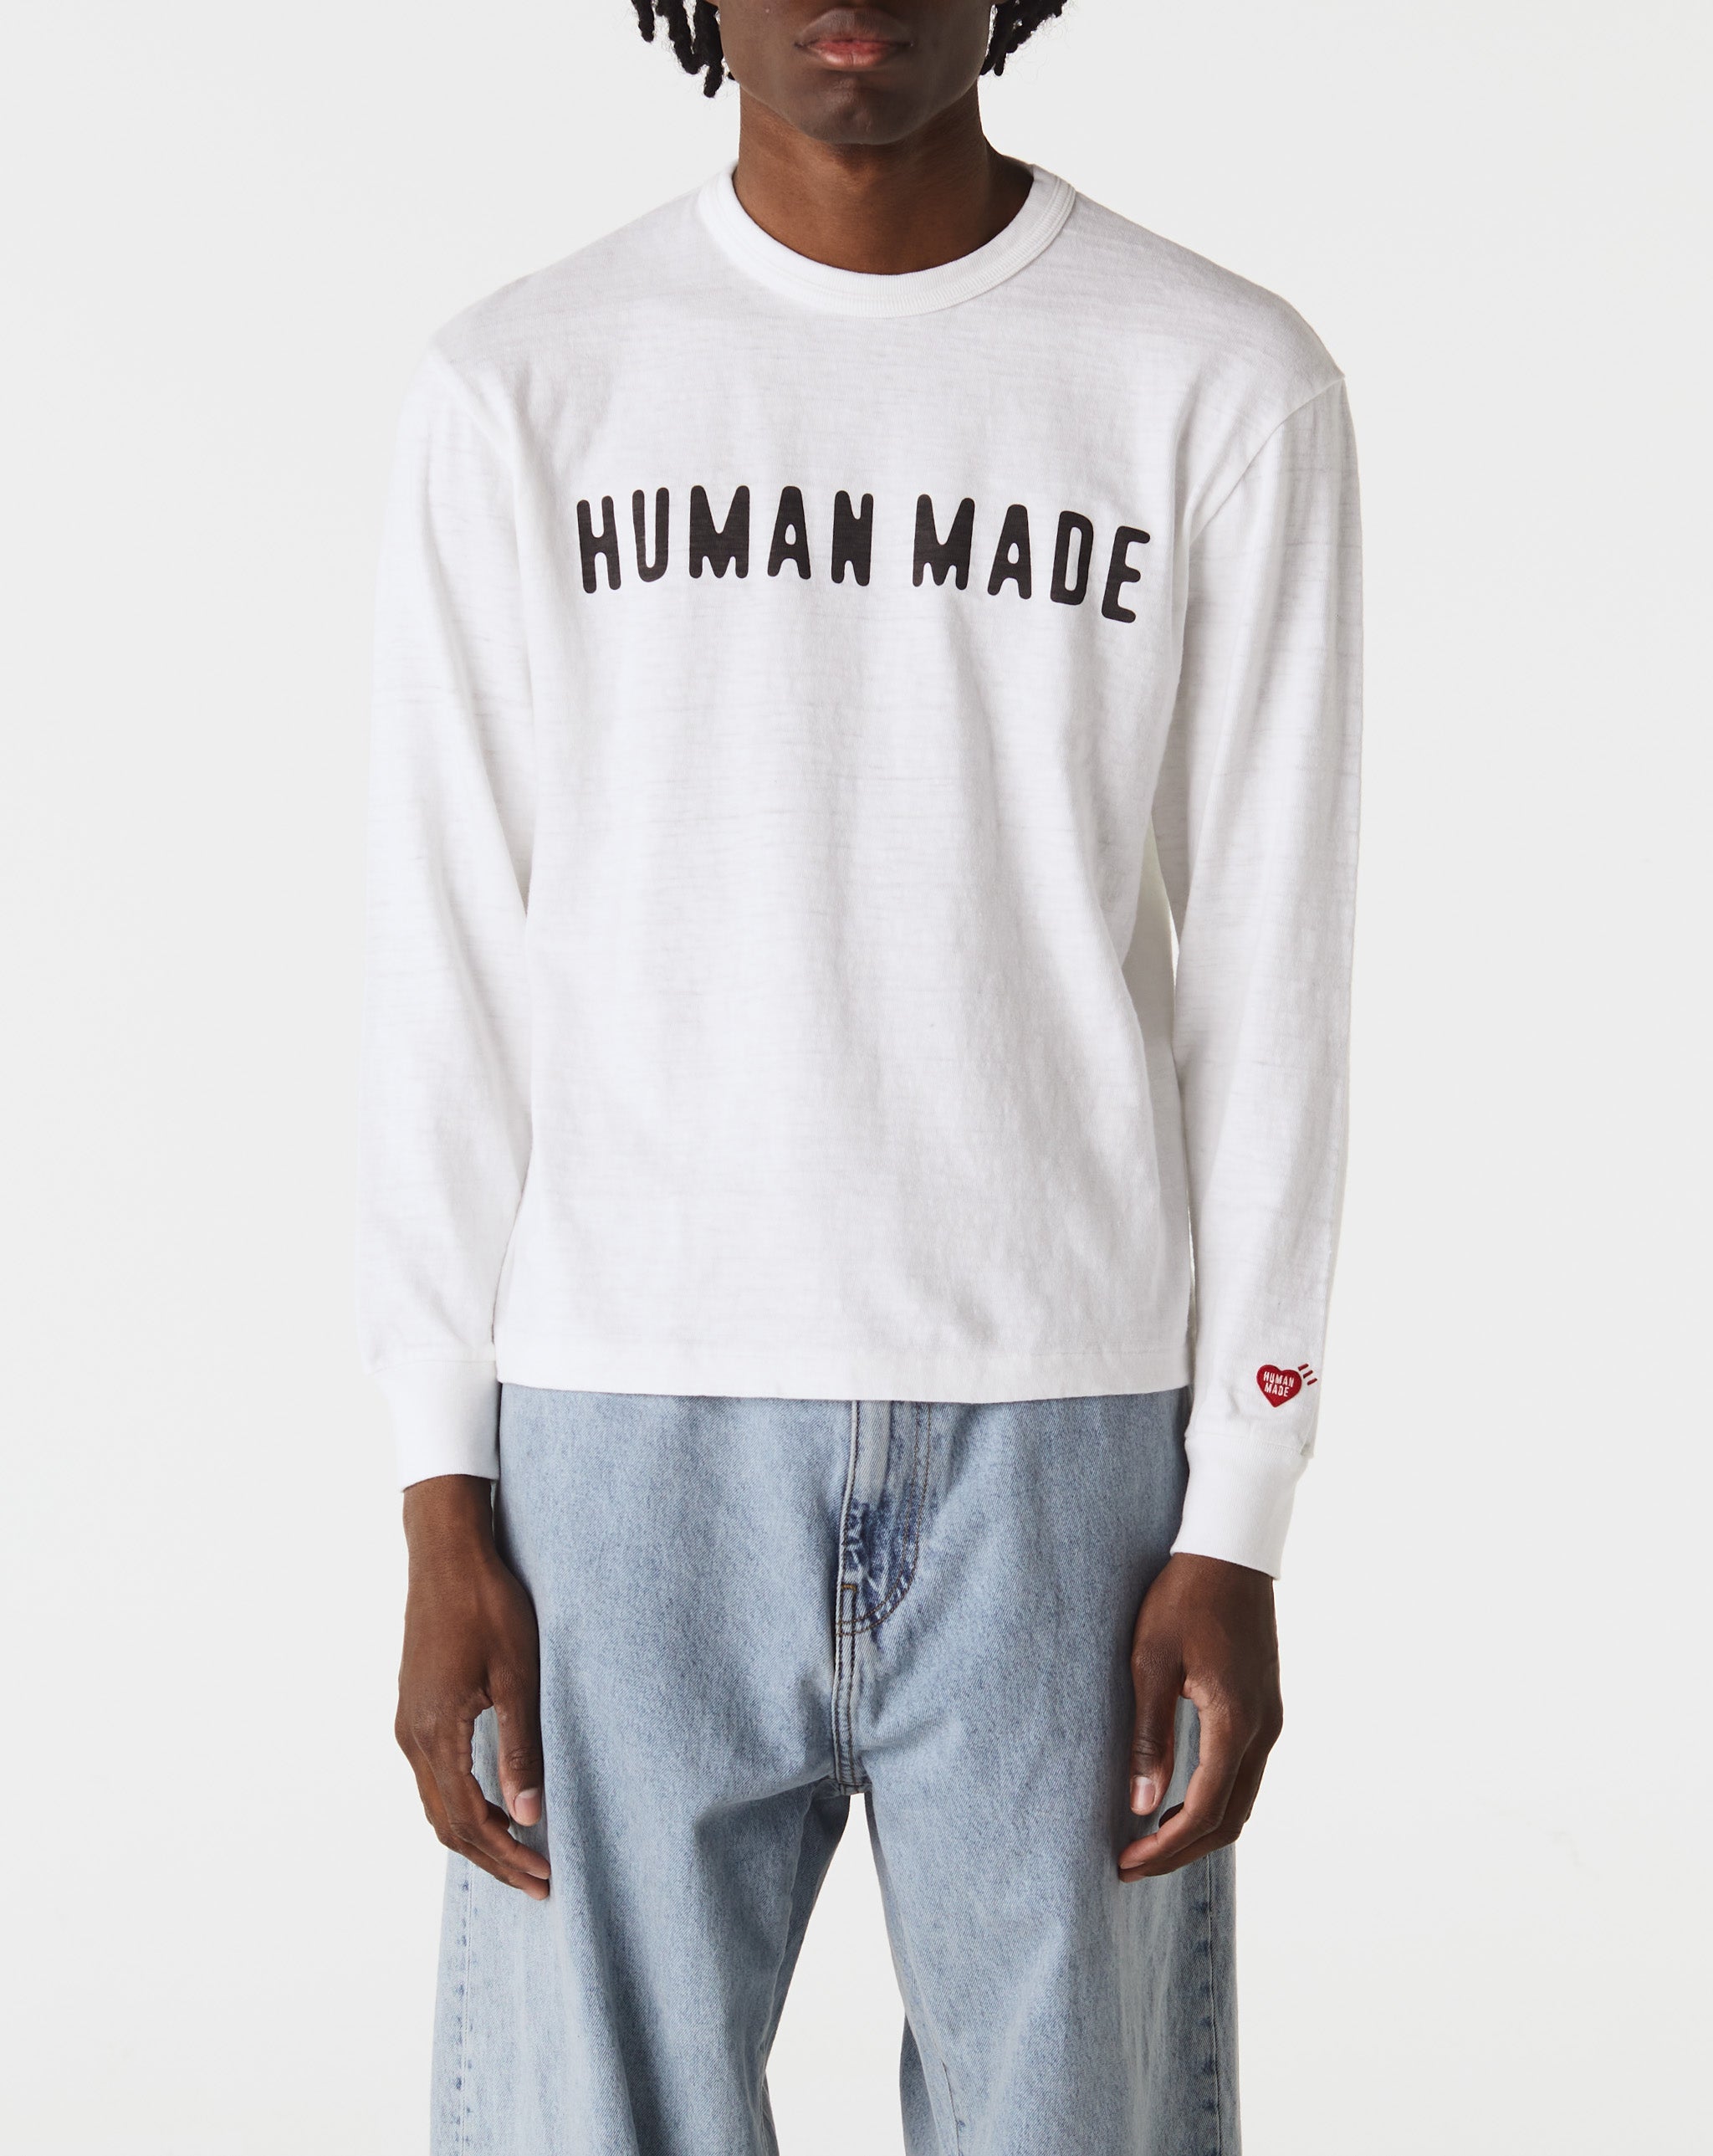 Human Made Graphic L/S T-Shirt  - XHIBITION